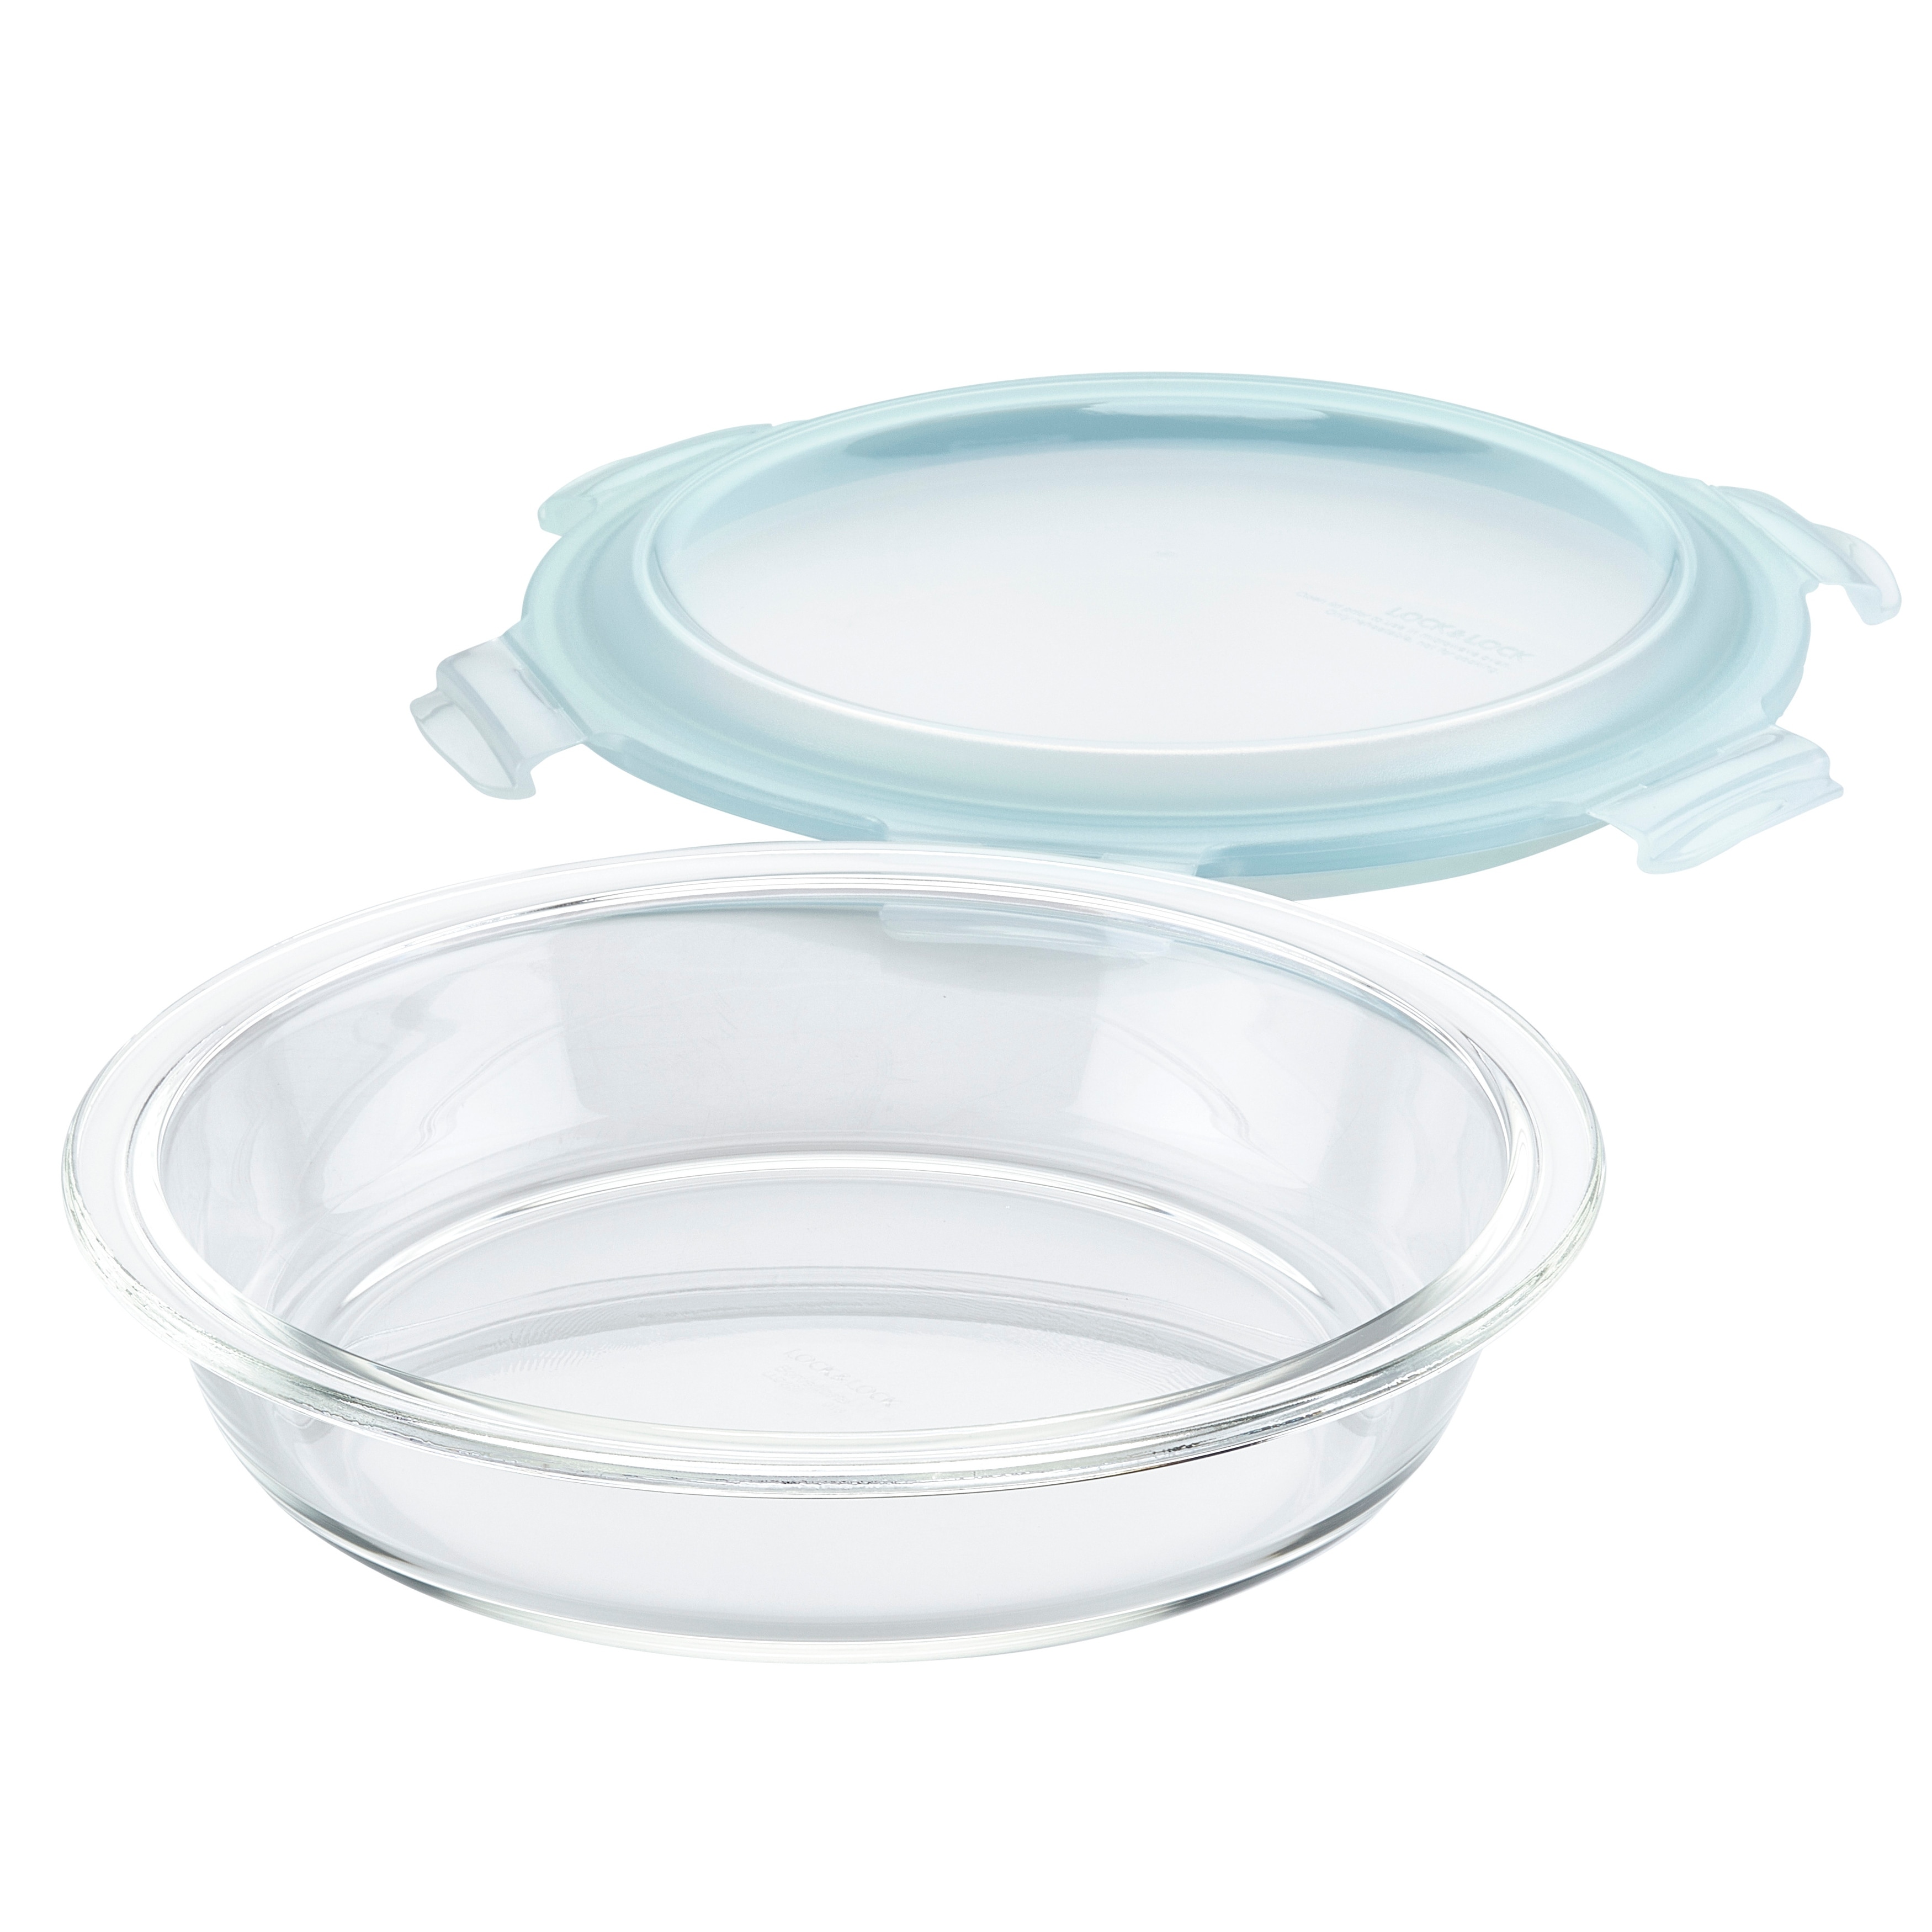 https://ak1.ostkcdn.com/images/products/is/images/direct/d1bc979a22499ab1a96051ee6240b021f1cbded4/LocknLock-Purely-Better-Glass-Round-Pie-Baking-Dish-and-Food-Container-with-Lid%2C-9.5-Inch.jpg